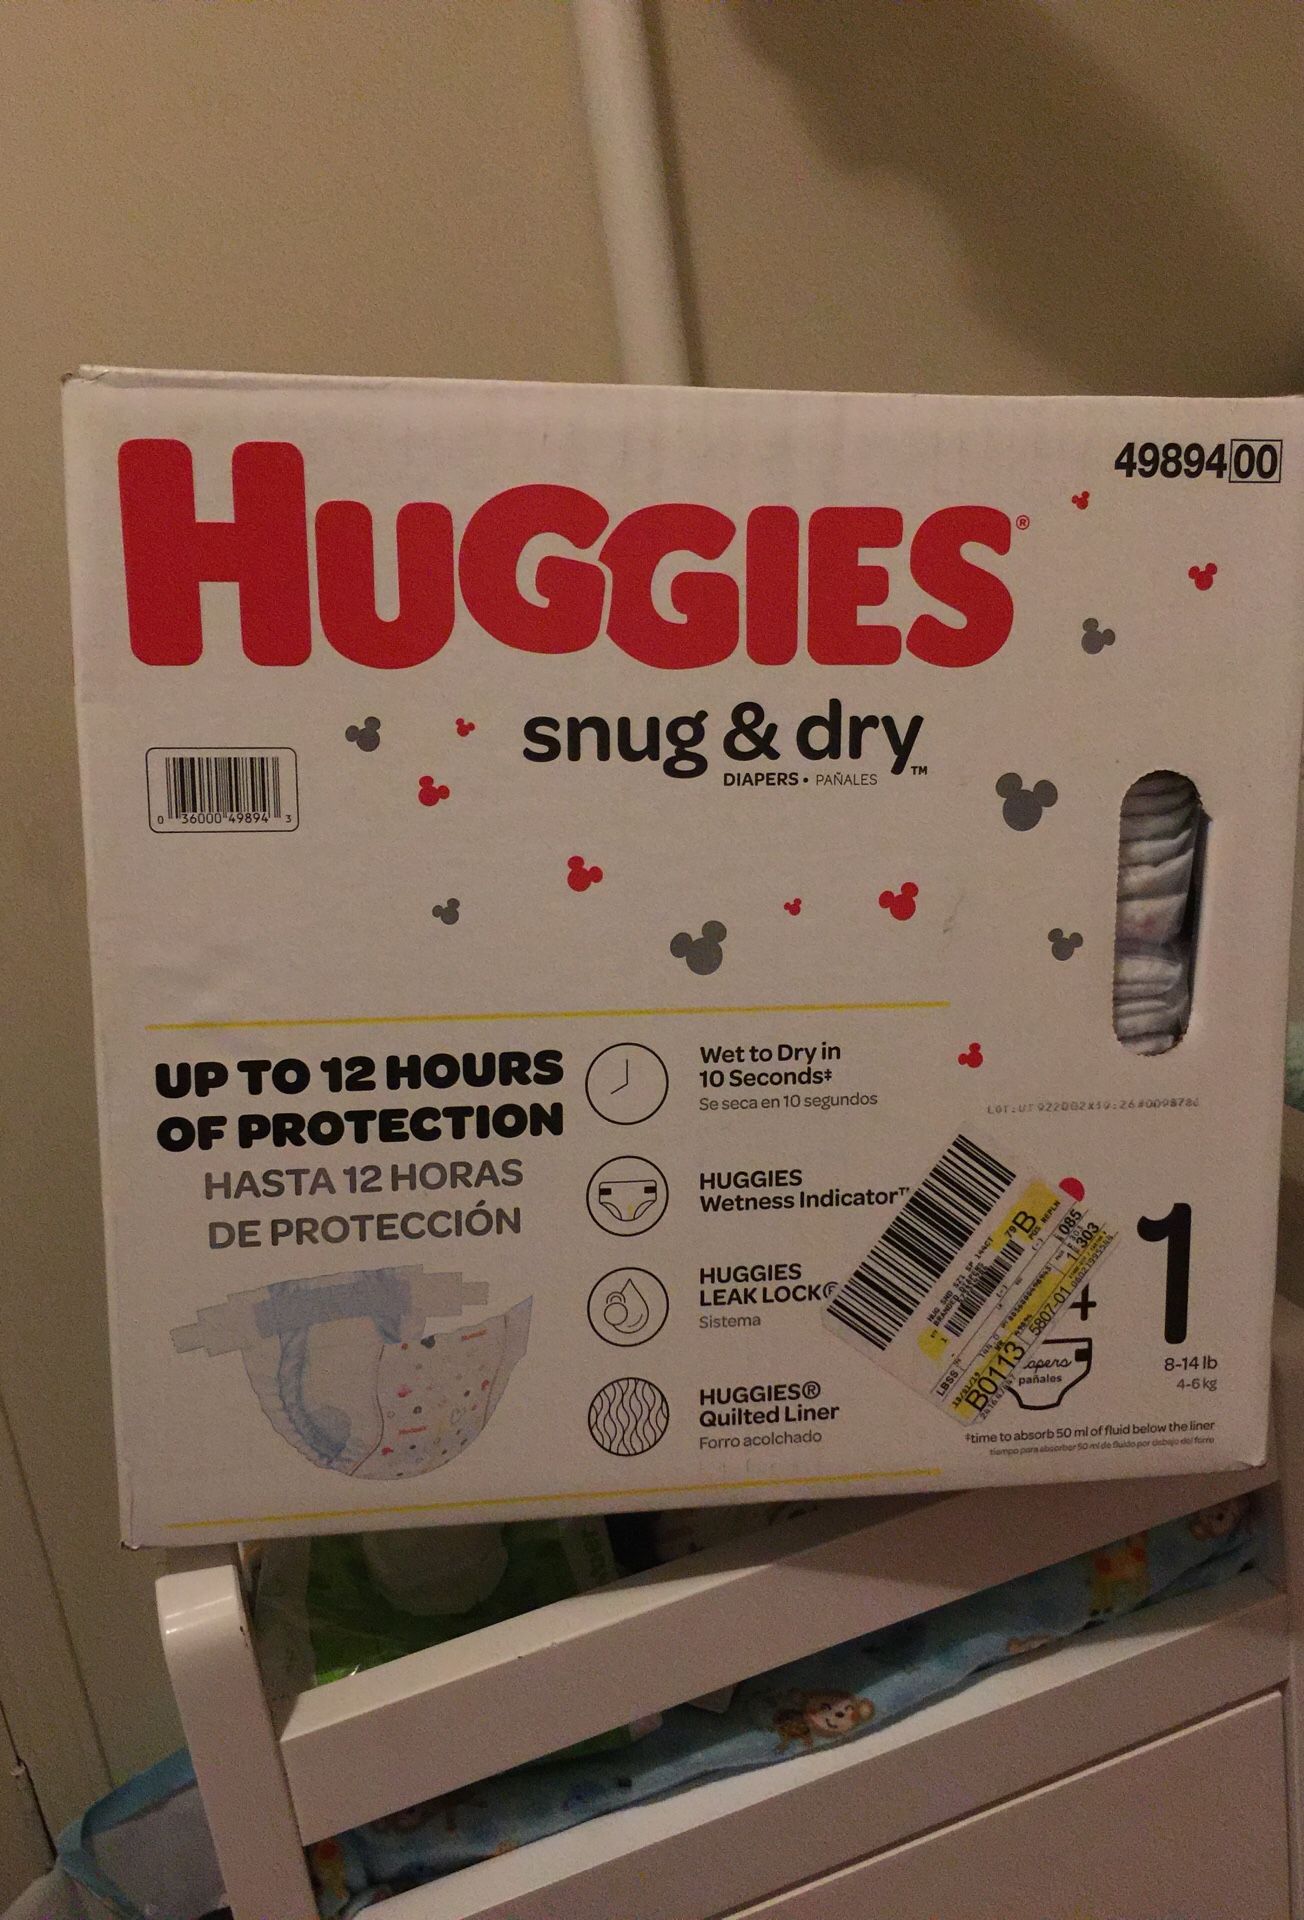 Huggies one month diapers/ pampers